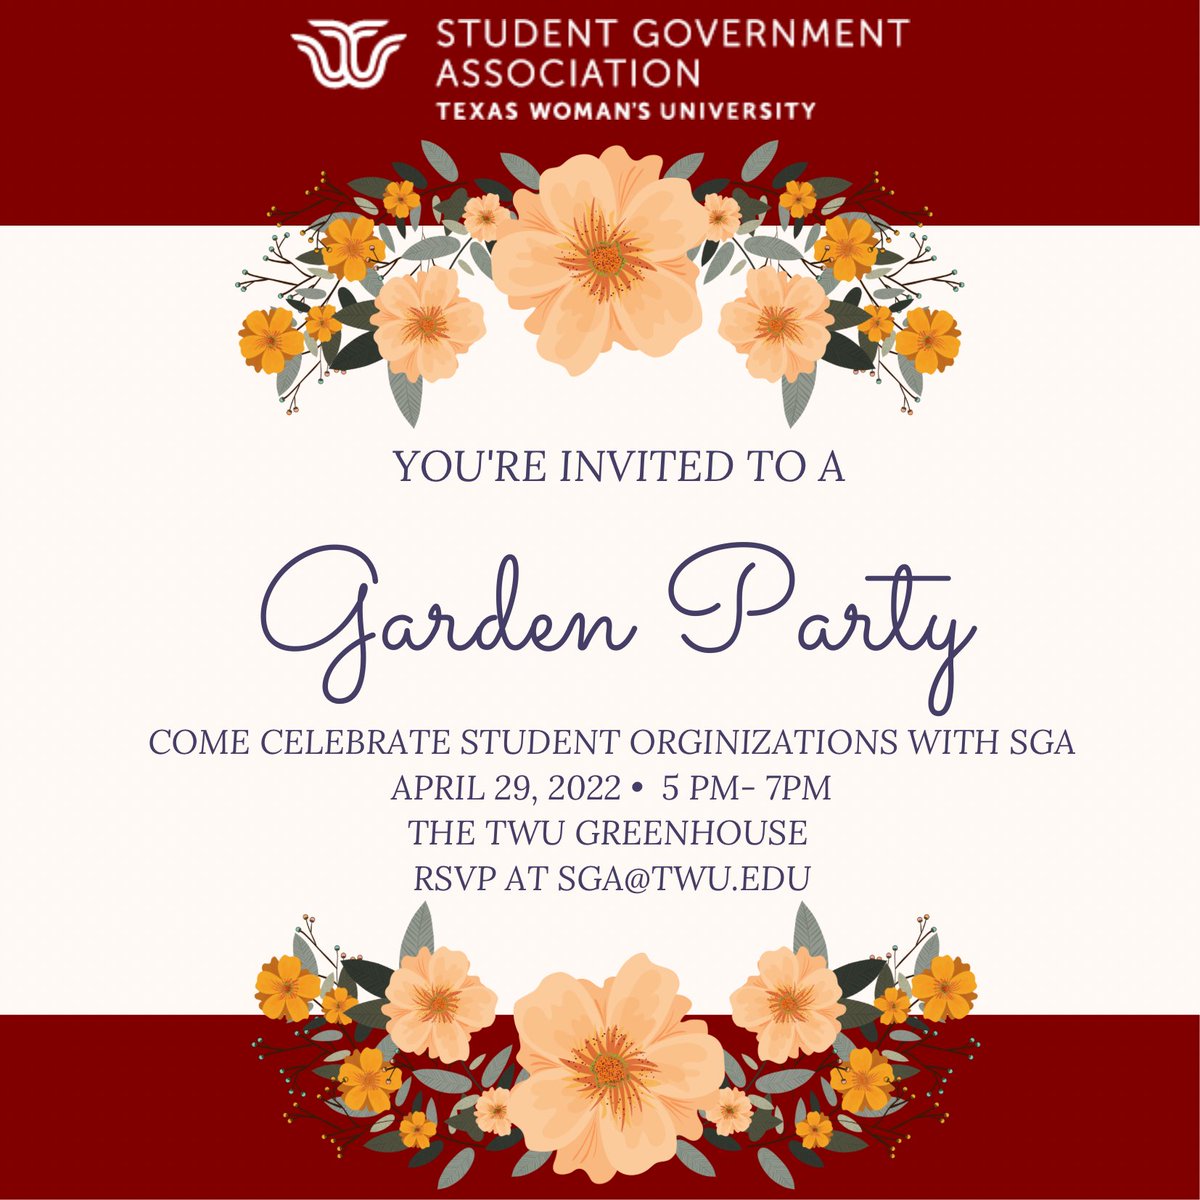 Join us Friday April 29th for our end of year garden party. We will be celebrating student organizations and their hard work this school year. Our garden party will happen at the green house from 5pm-7pm. #twusga